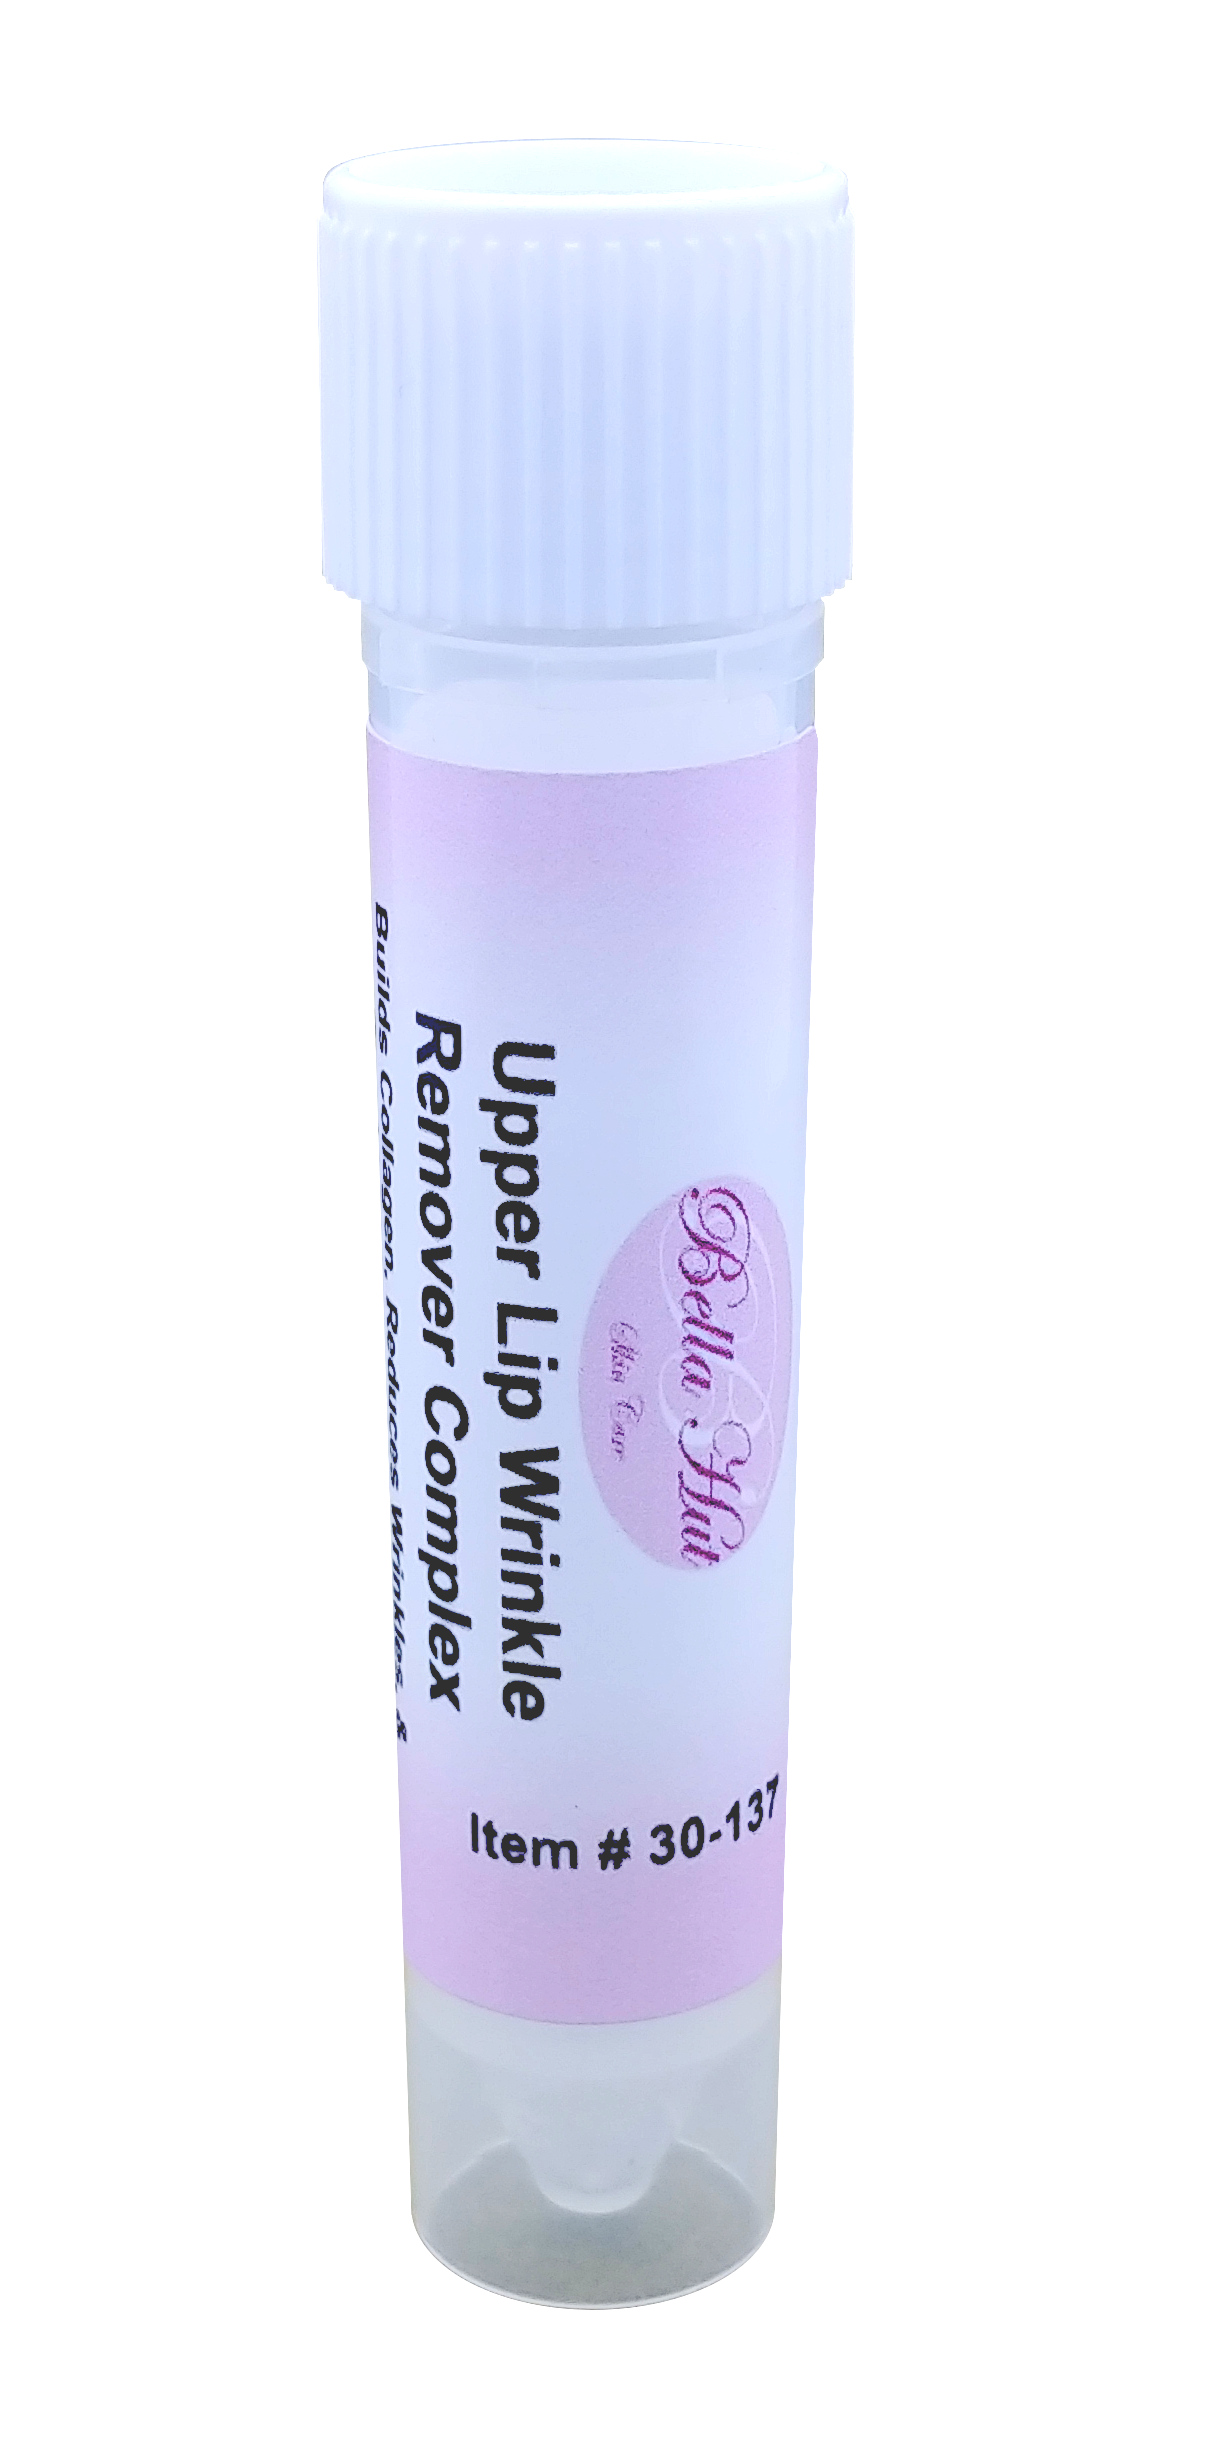 A peptide complex to add to a cream that reduces upper lip wrinkles and plumps lips